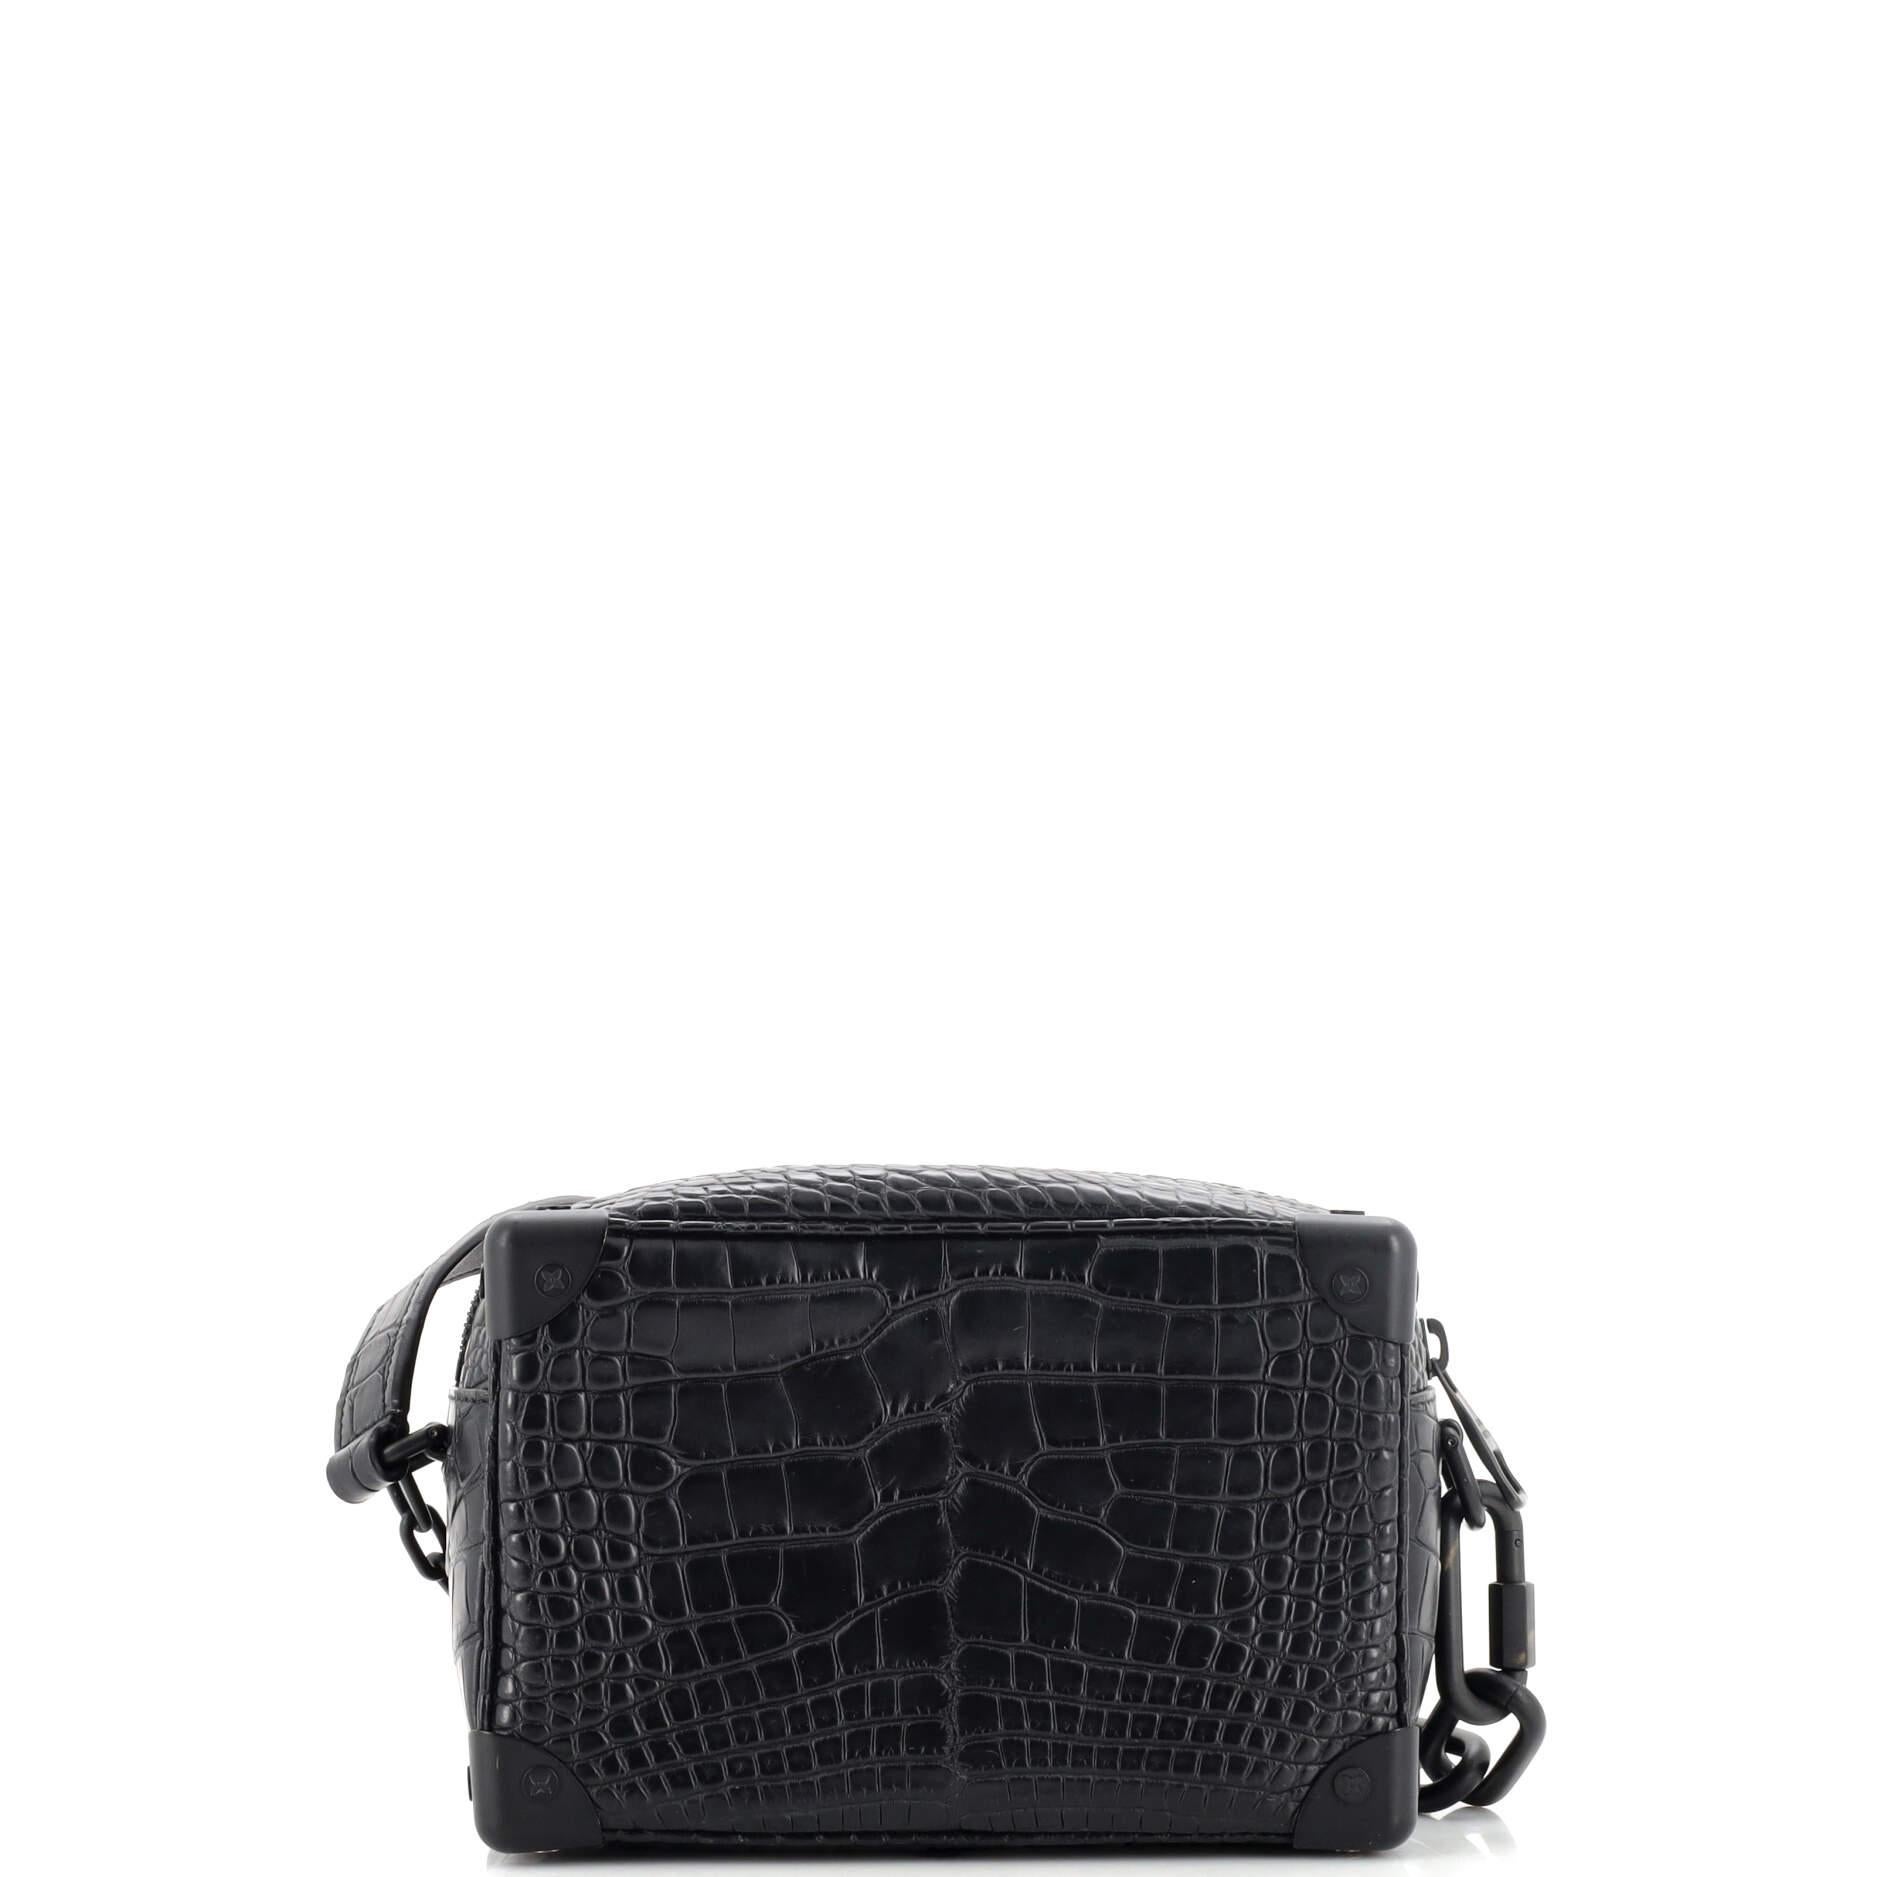 Louis Vuitton Soft Trunk Bag Alligator Mini In Good Condition For Sale In NY, NY